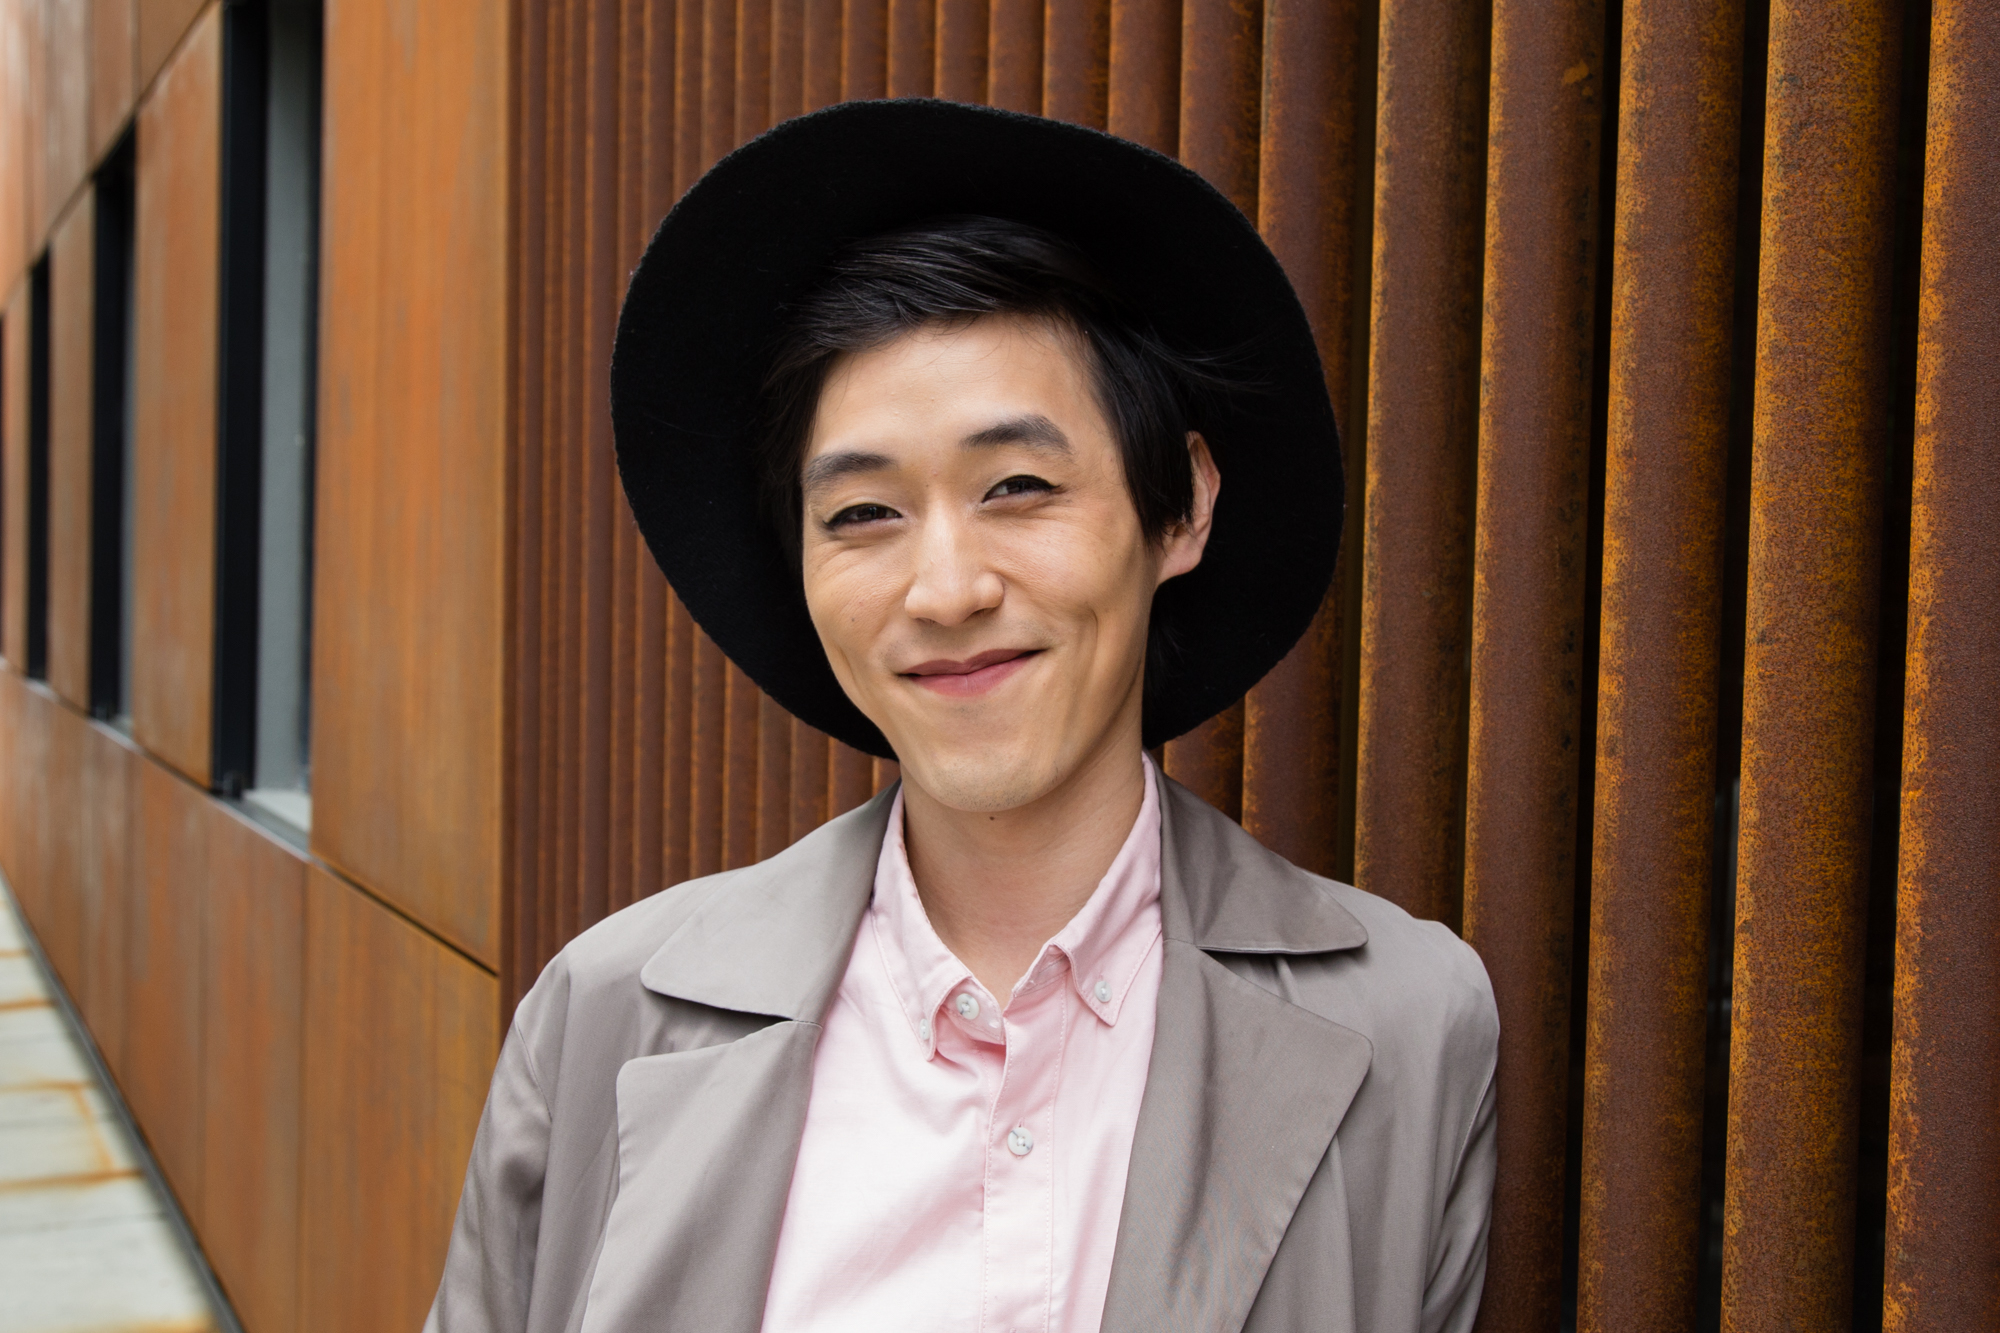 Image: Portrait of Gavin Pak leaning on a rust colored building. Gavin wears a black hat that is pushed back so their entire face is visible. A grey trench coat covers their pink button-up shirt. Photo by Joshua Johnson